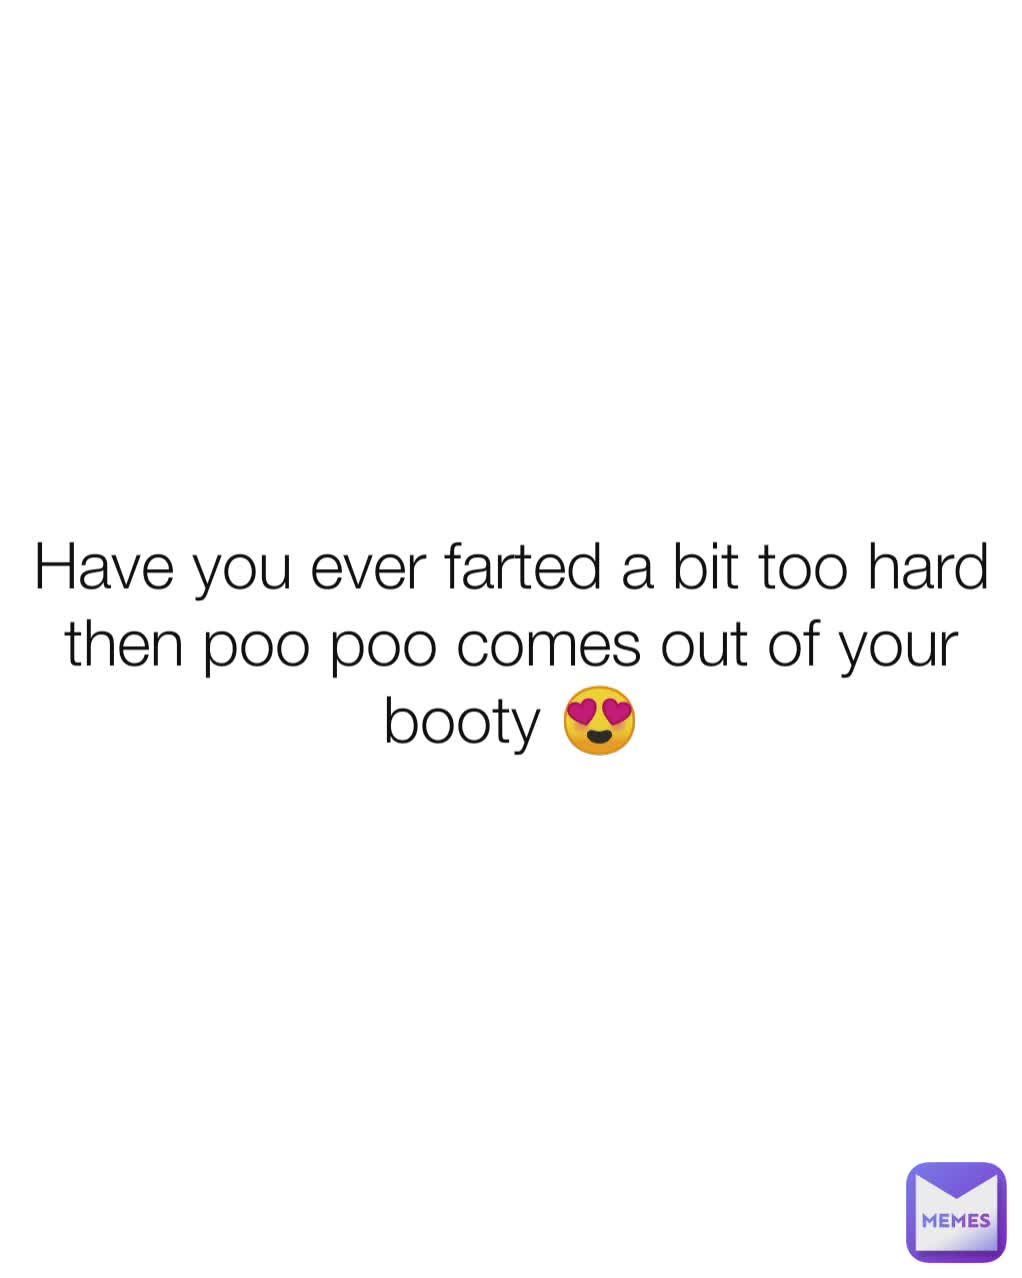 Have you ever farted a bit too hard then poo poo comes out of your booty 😍